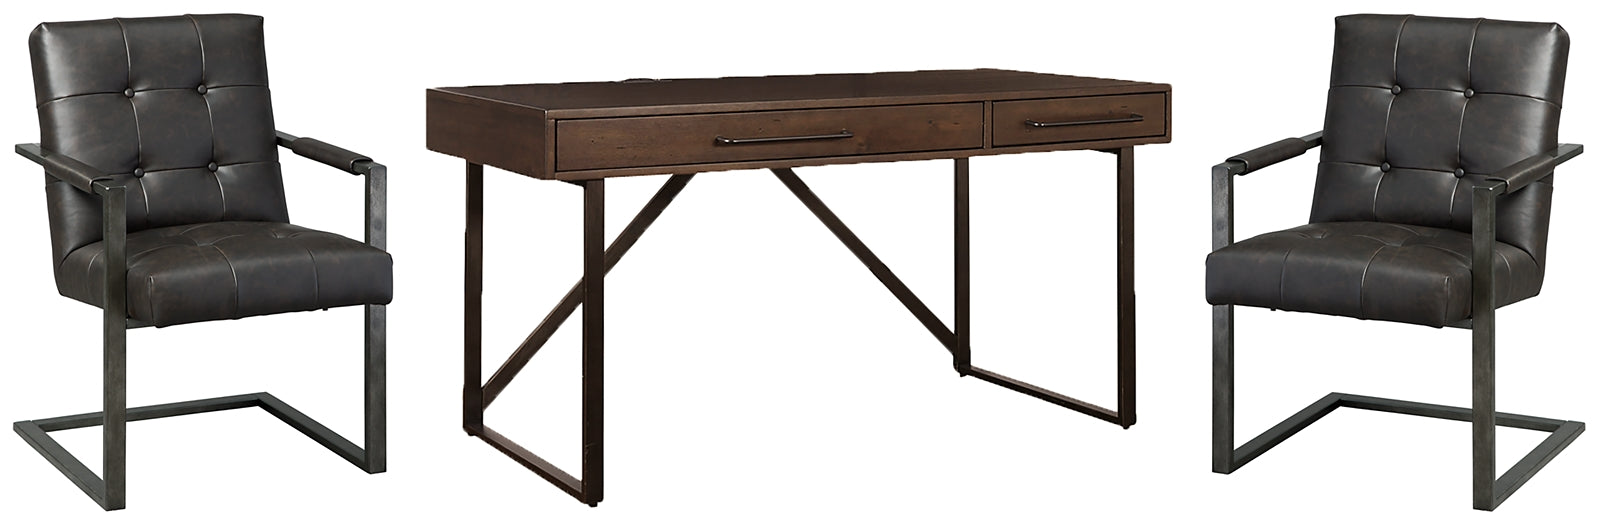 Starmore Home Office Desk with Chair Smyrna Furniture Outlet